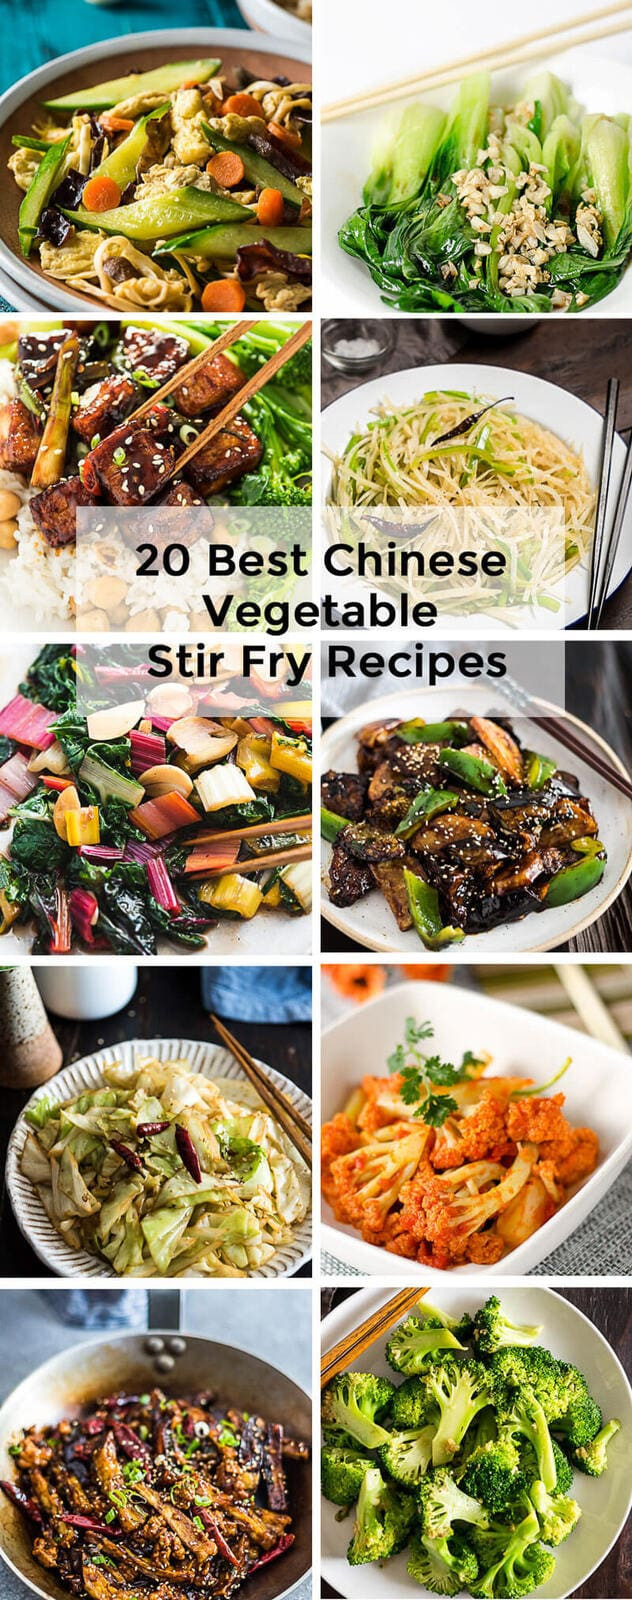 Asian Vegetable Stir Fry Recipes
 20 Best Chinese Ve able Stir Fry Recipes